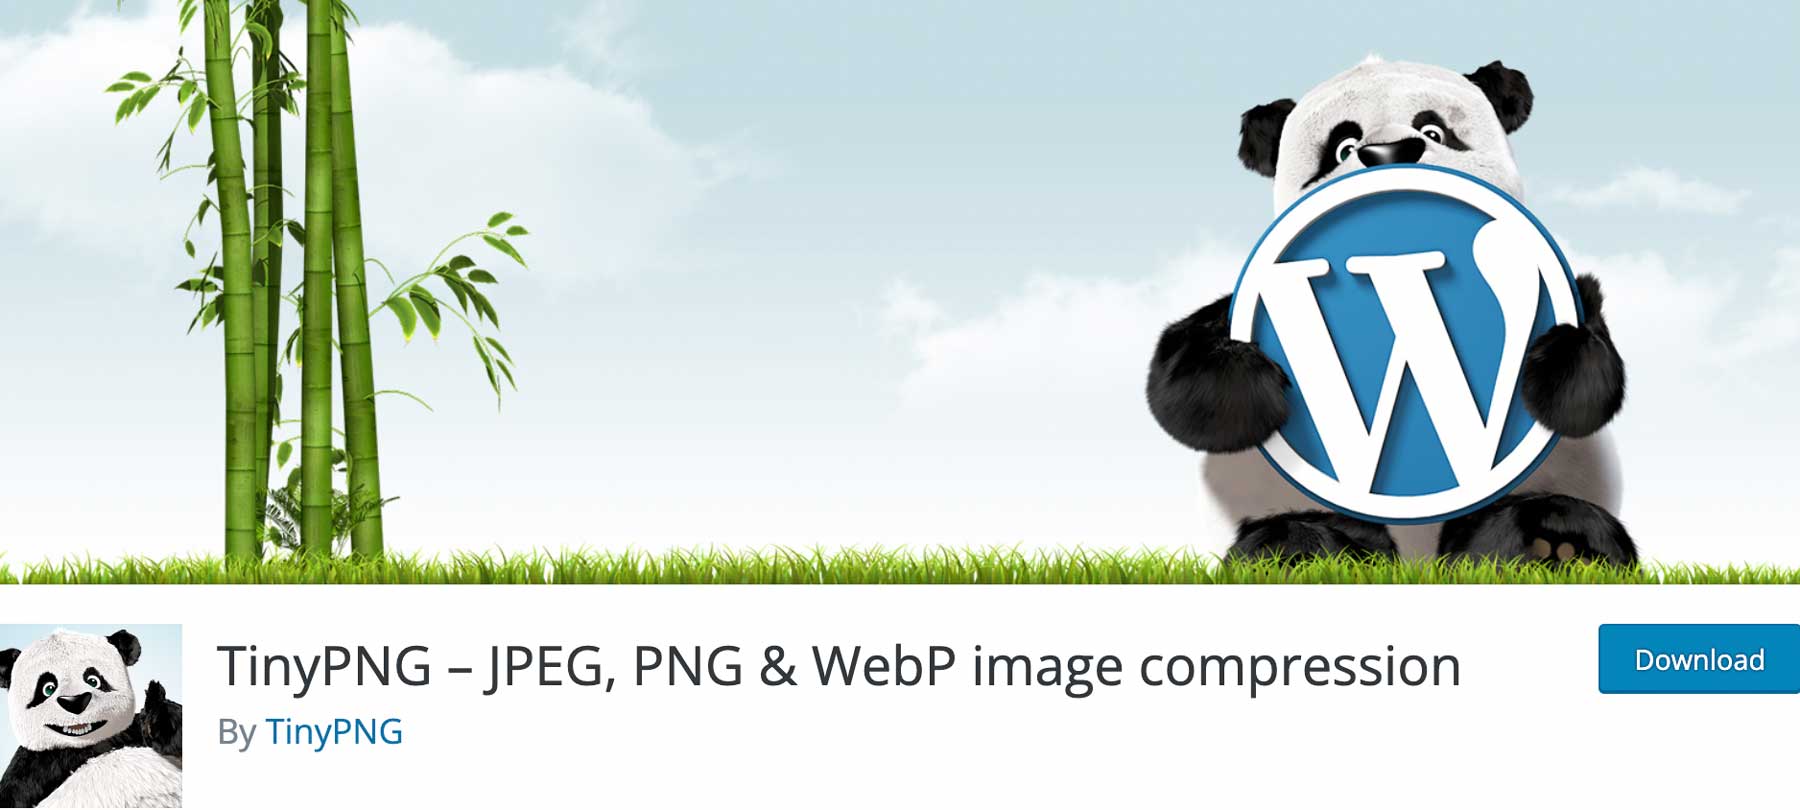 The Compress JPEG and PNG Images plugin